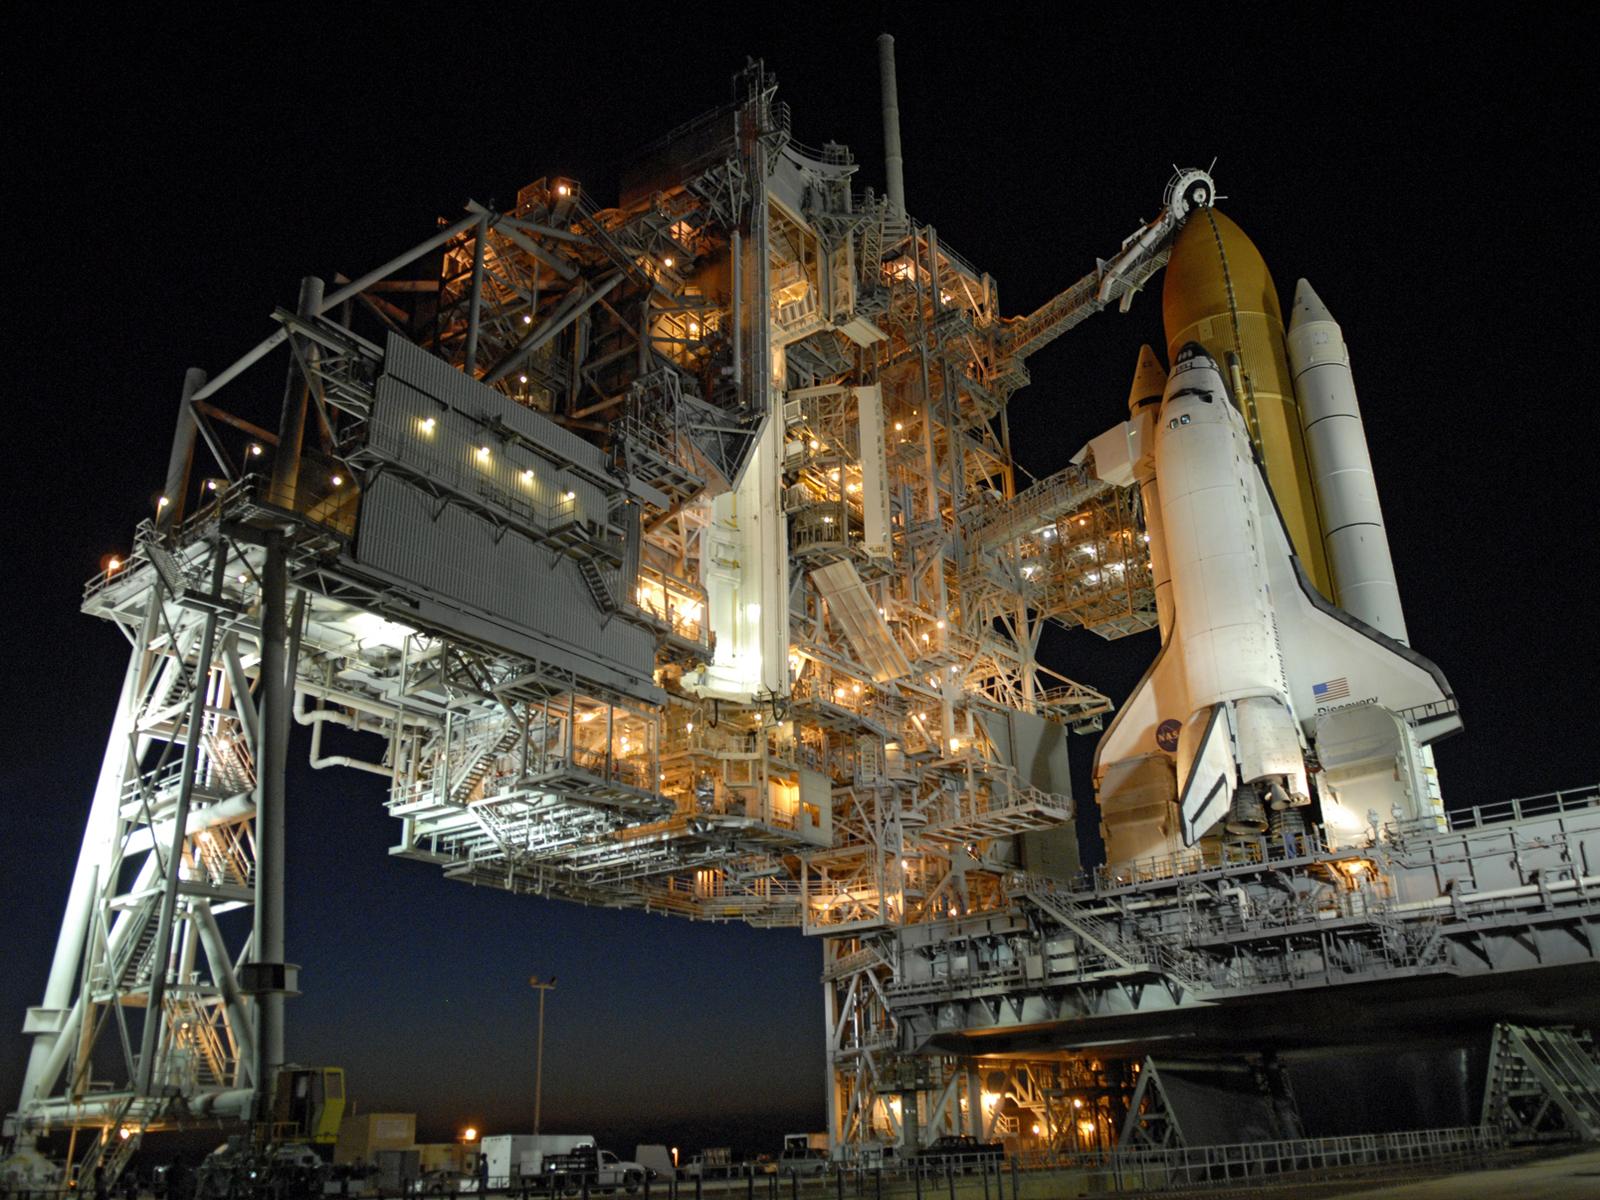 The space shuttle Discovery on Launch Pad 39A: 281 KB